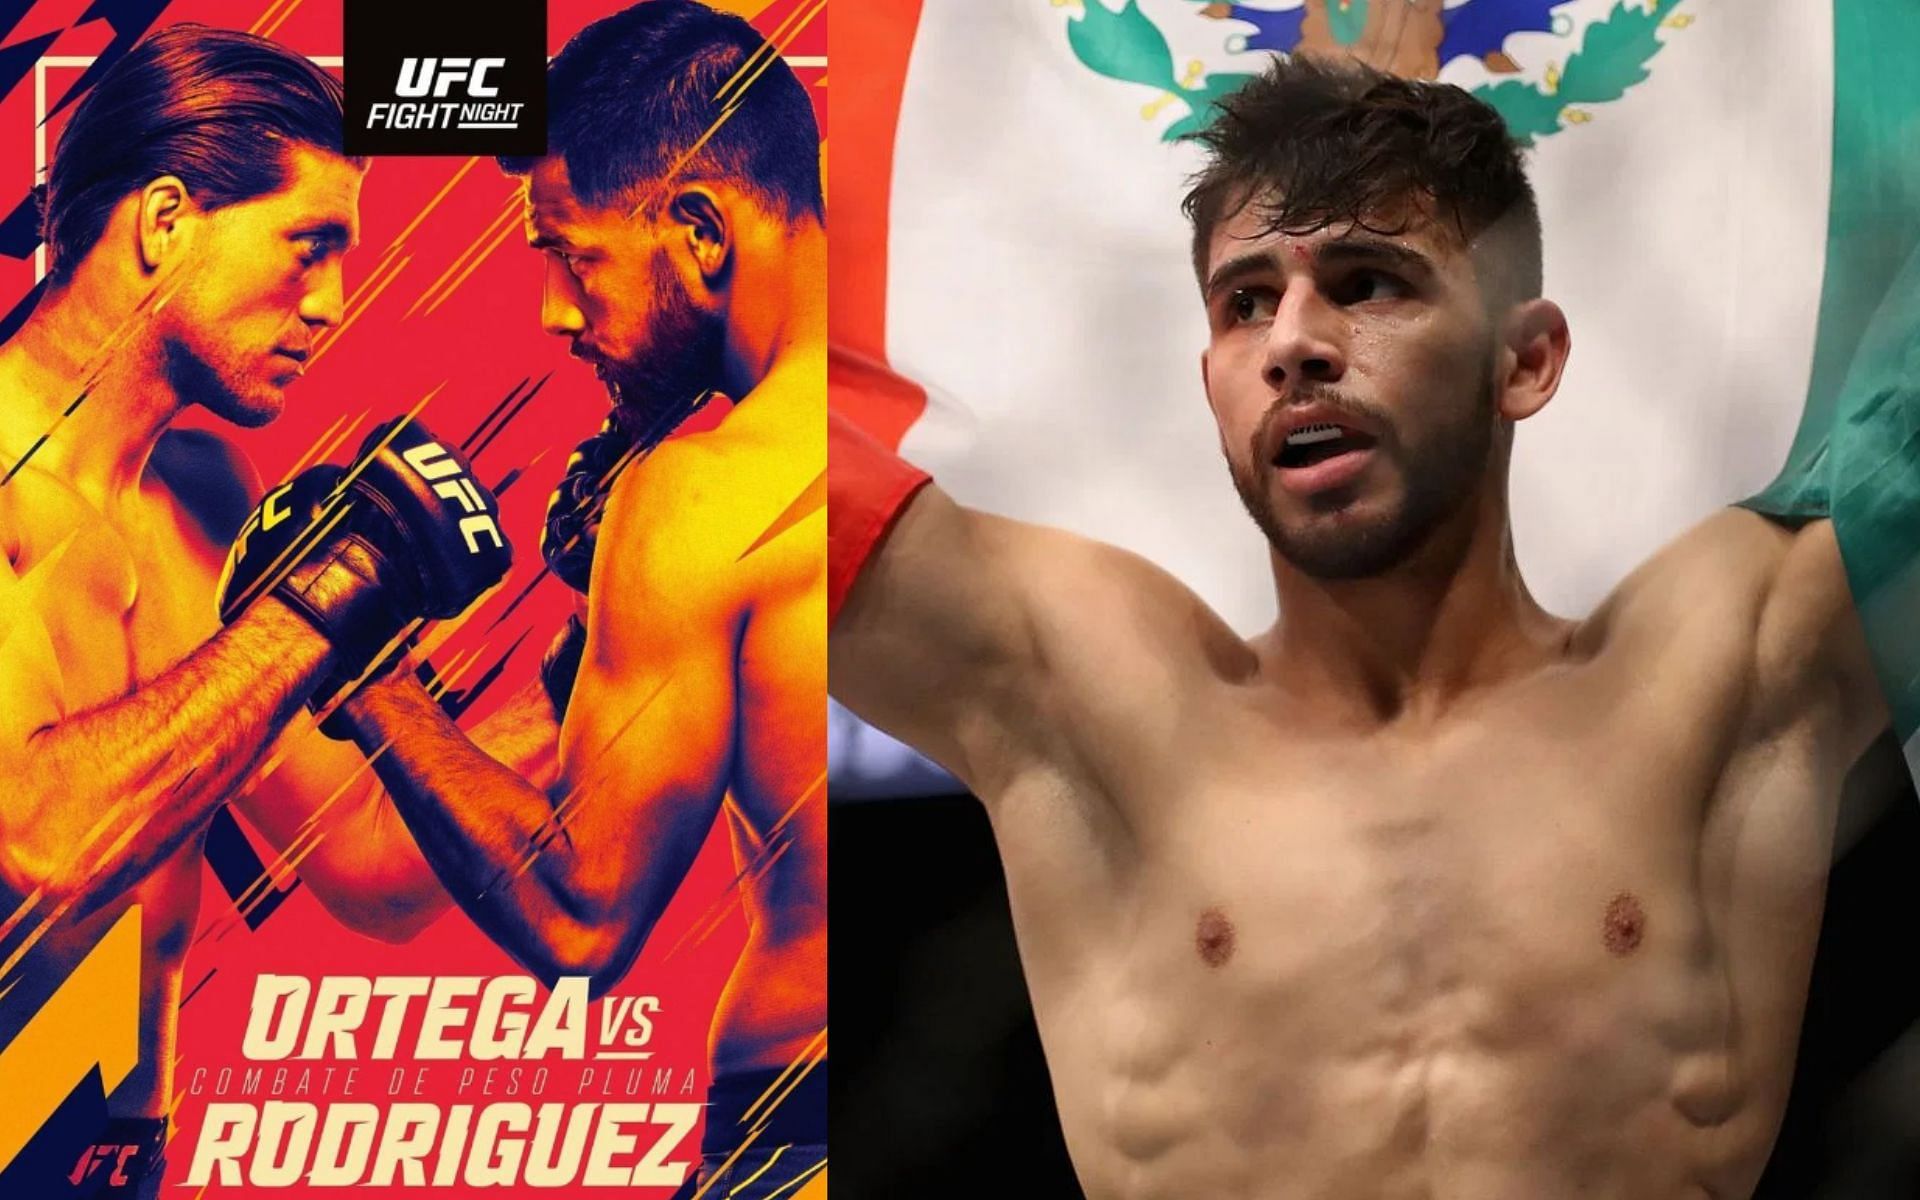 Yair Rodriguez (right) shares reasons why he didn